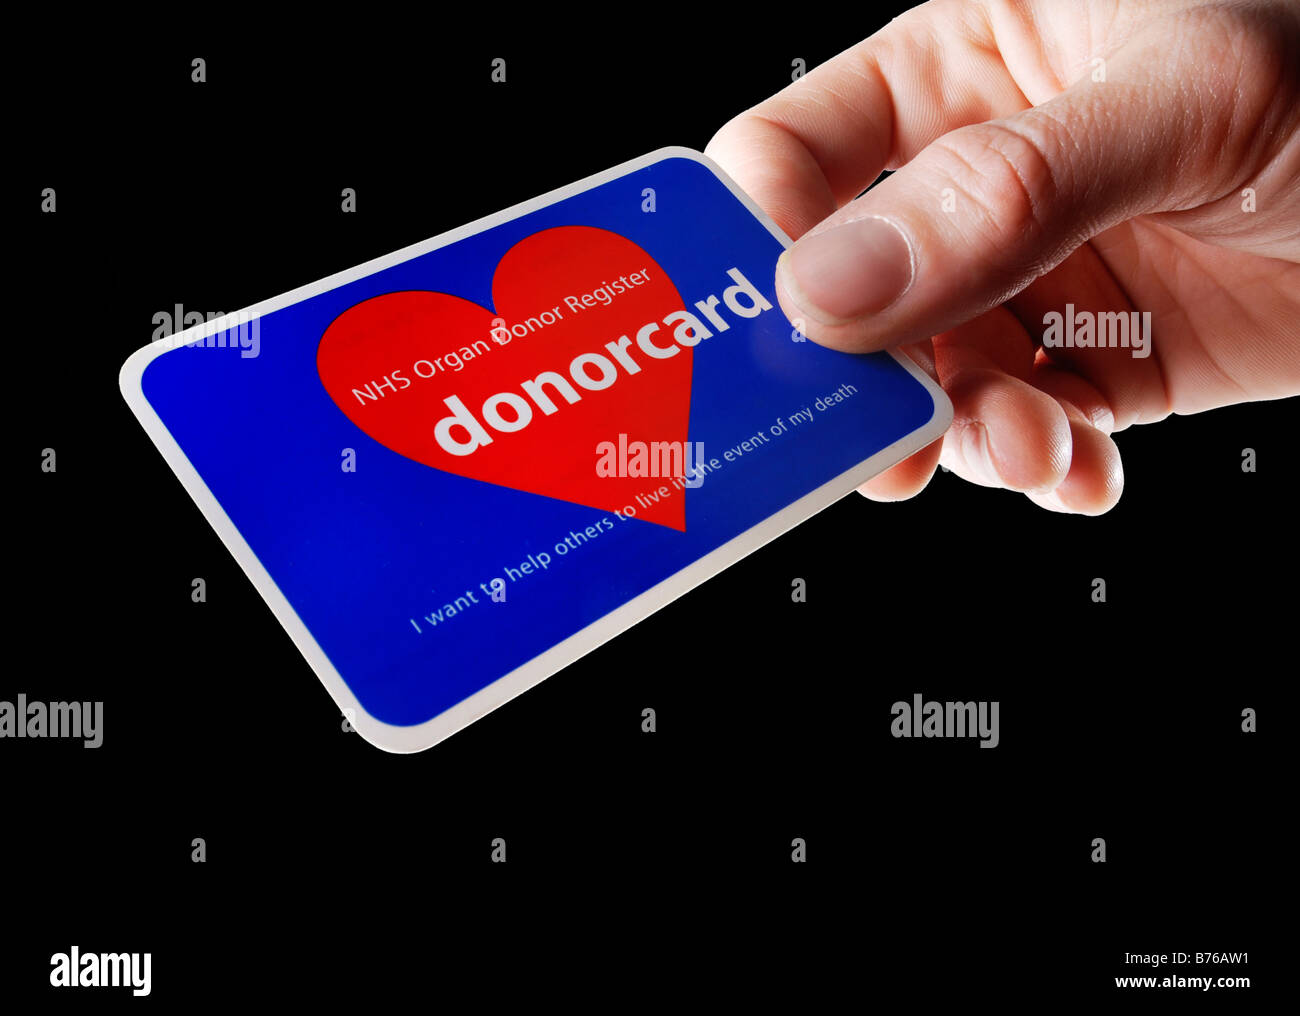 Hand Offering Organ Donor Card Stock Photo Alamy